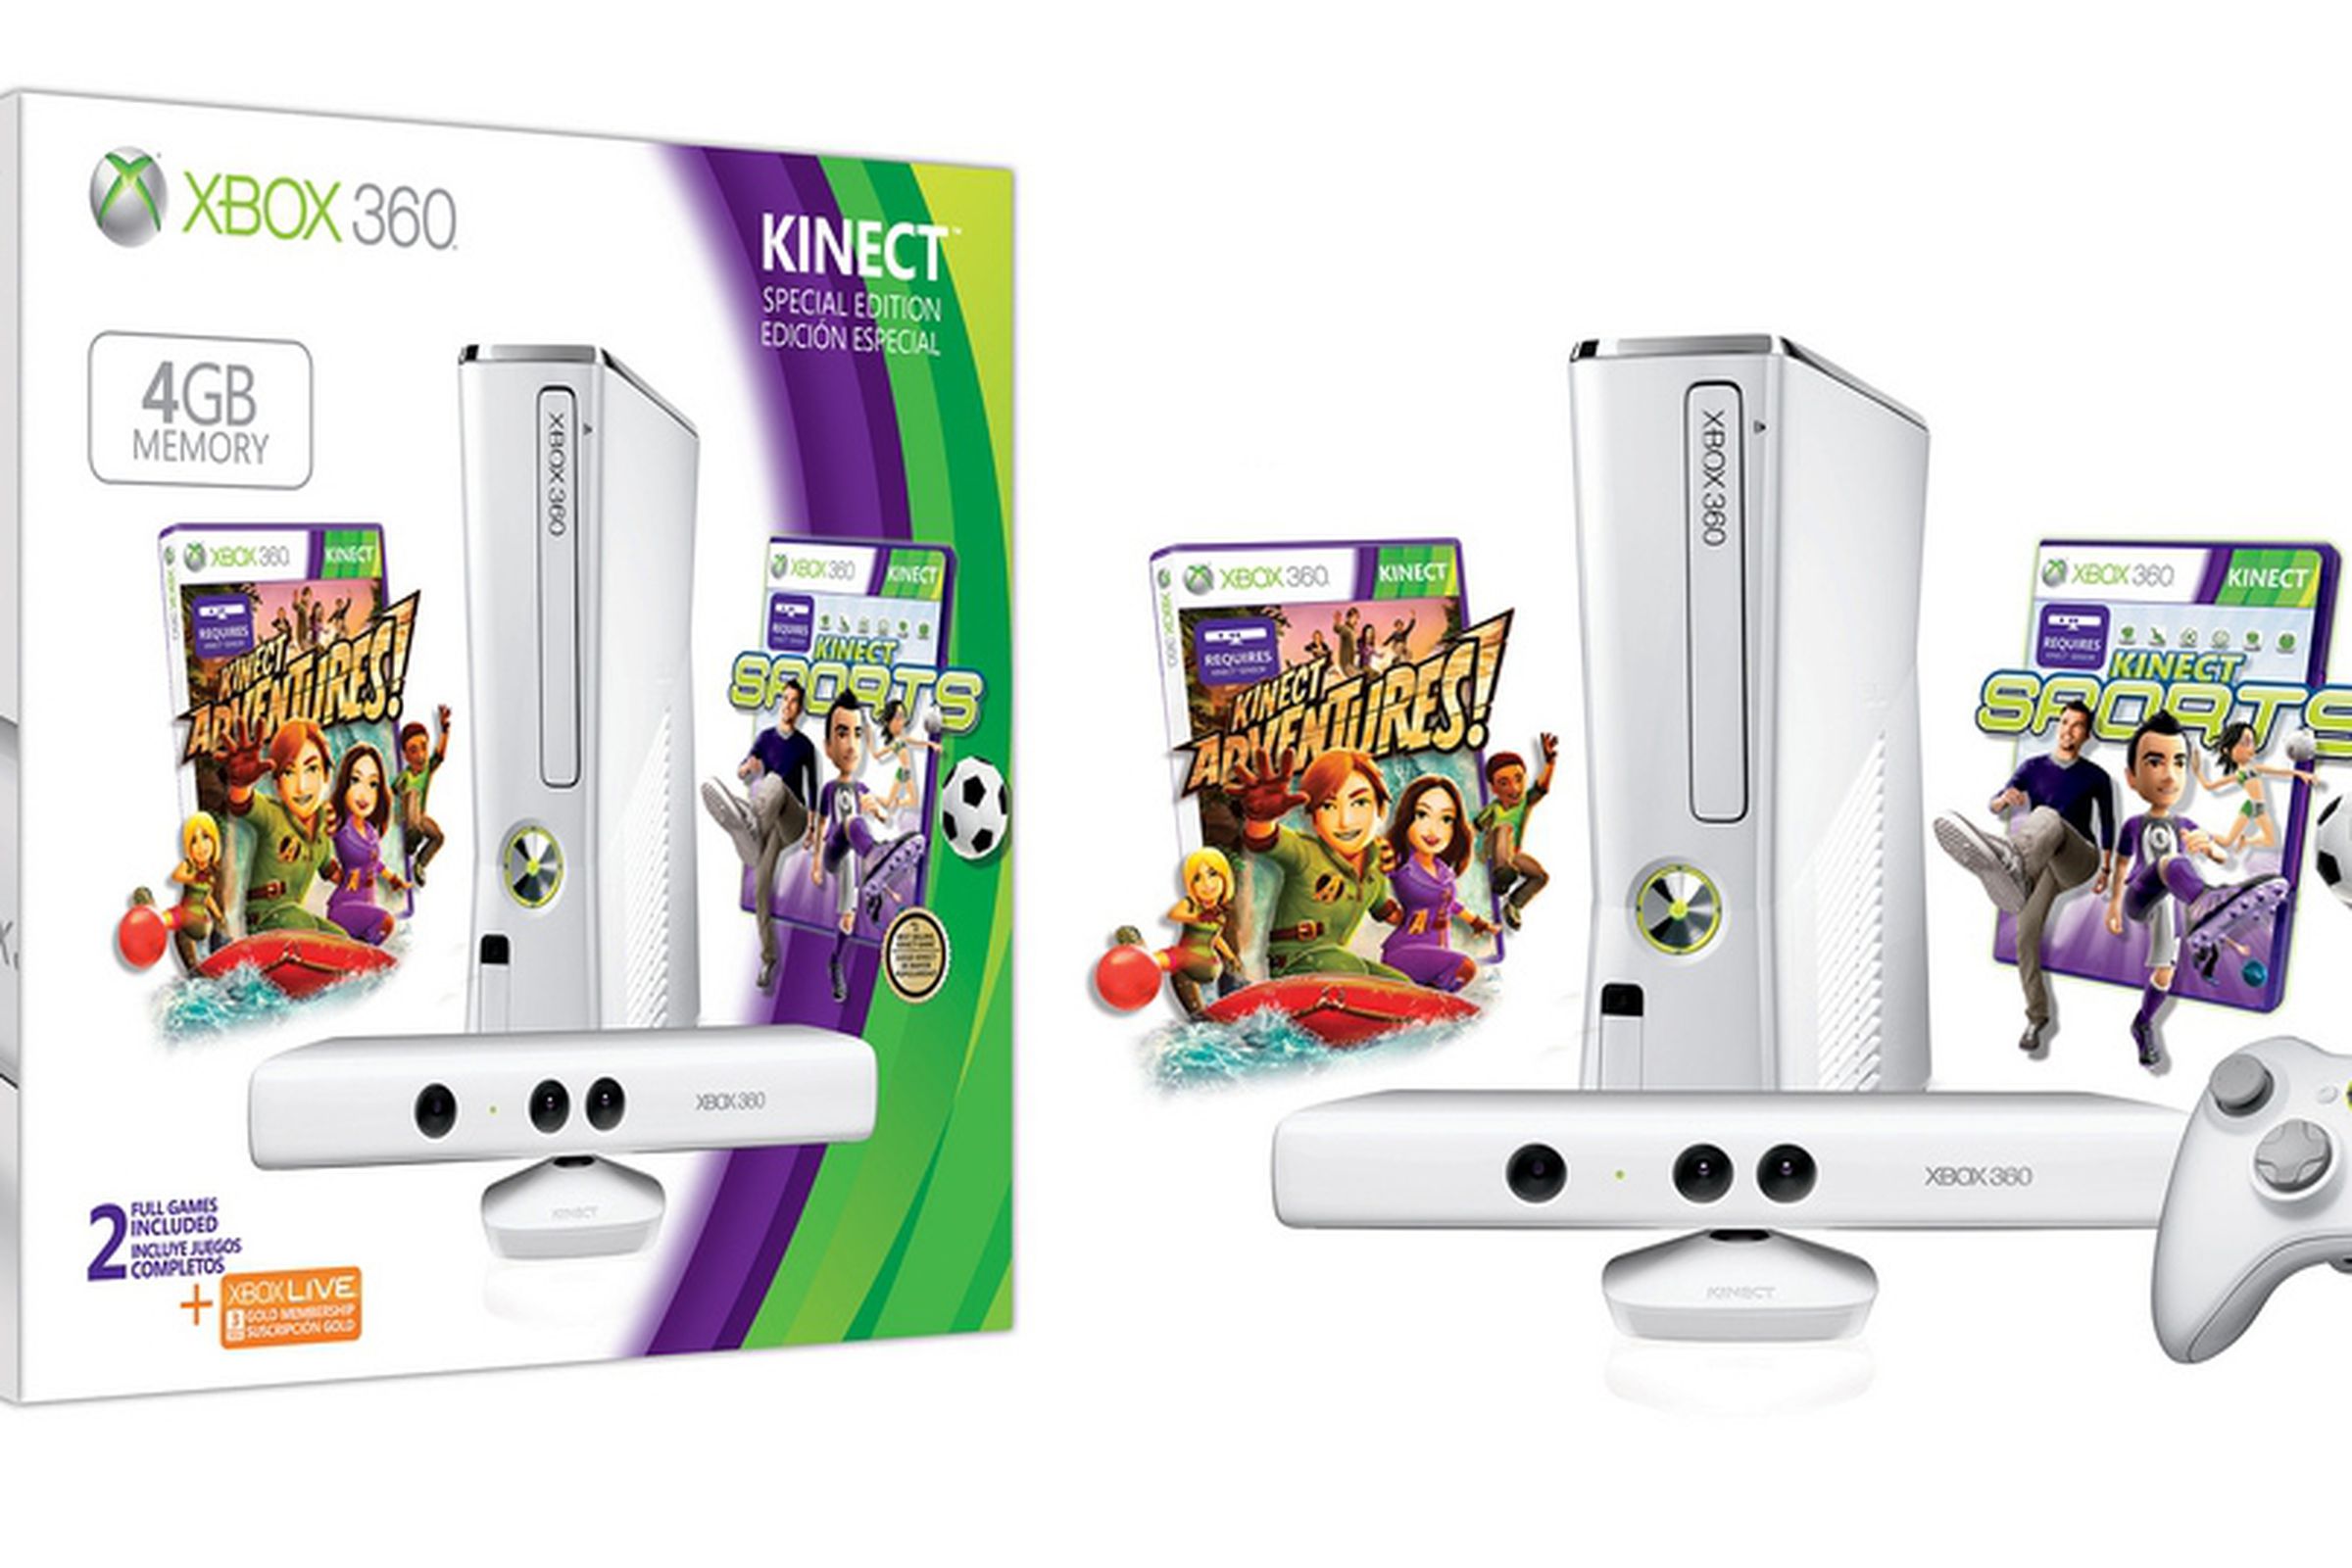 Xbox 360 Special Edition 4GB Kinect Family Bundle stock press 1024